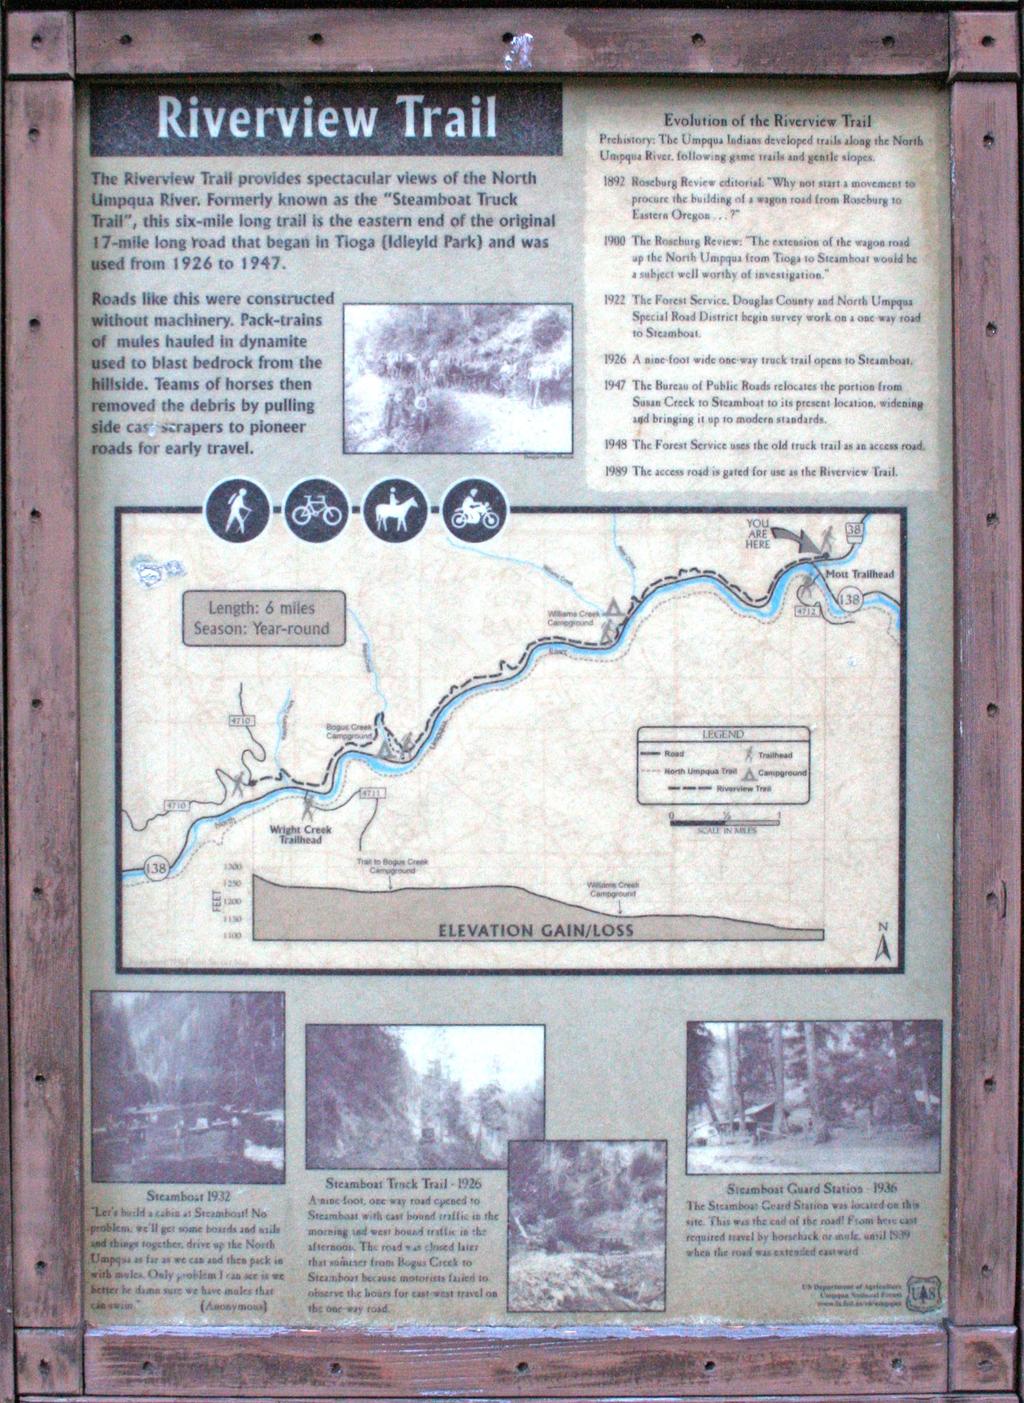 The enlarged view of the River View Trail interpretive sign (right) tells the history of road